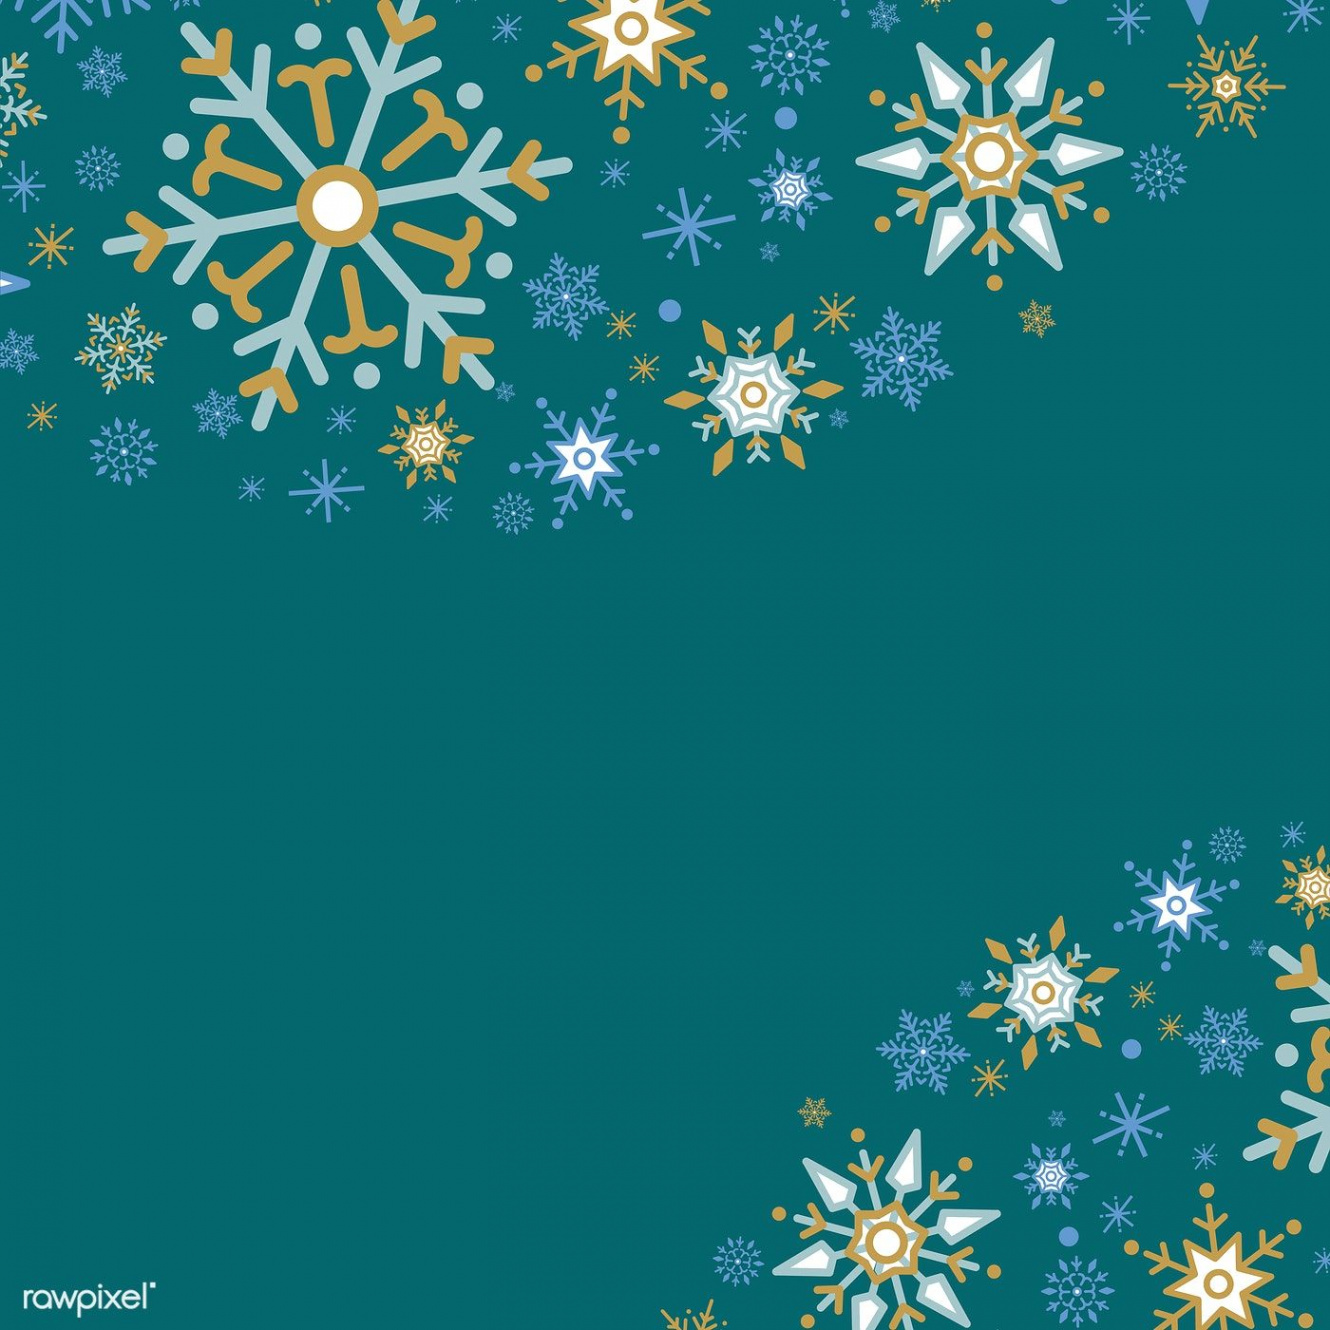 Festive Winter Wonderland: Green Christmas Background with Snowflakes